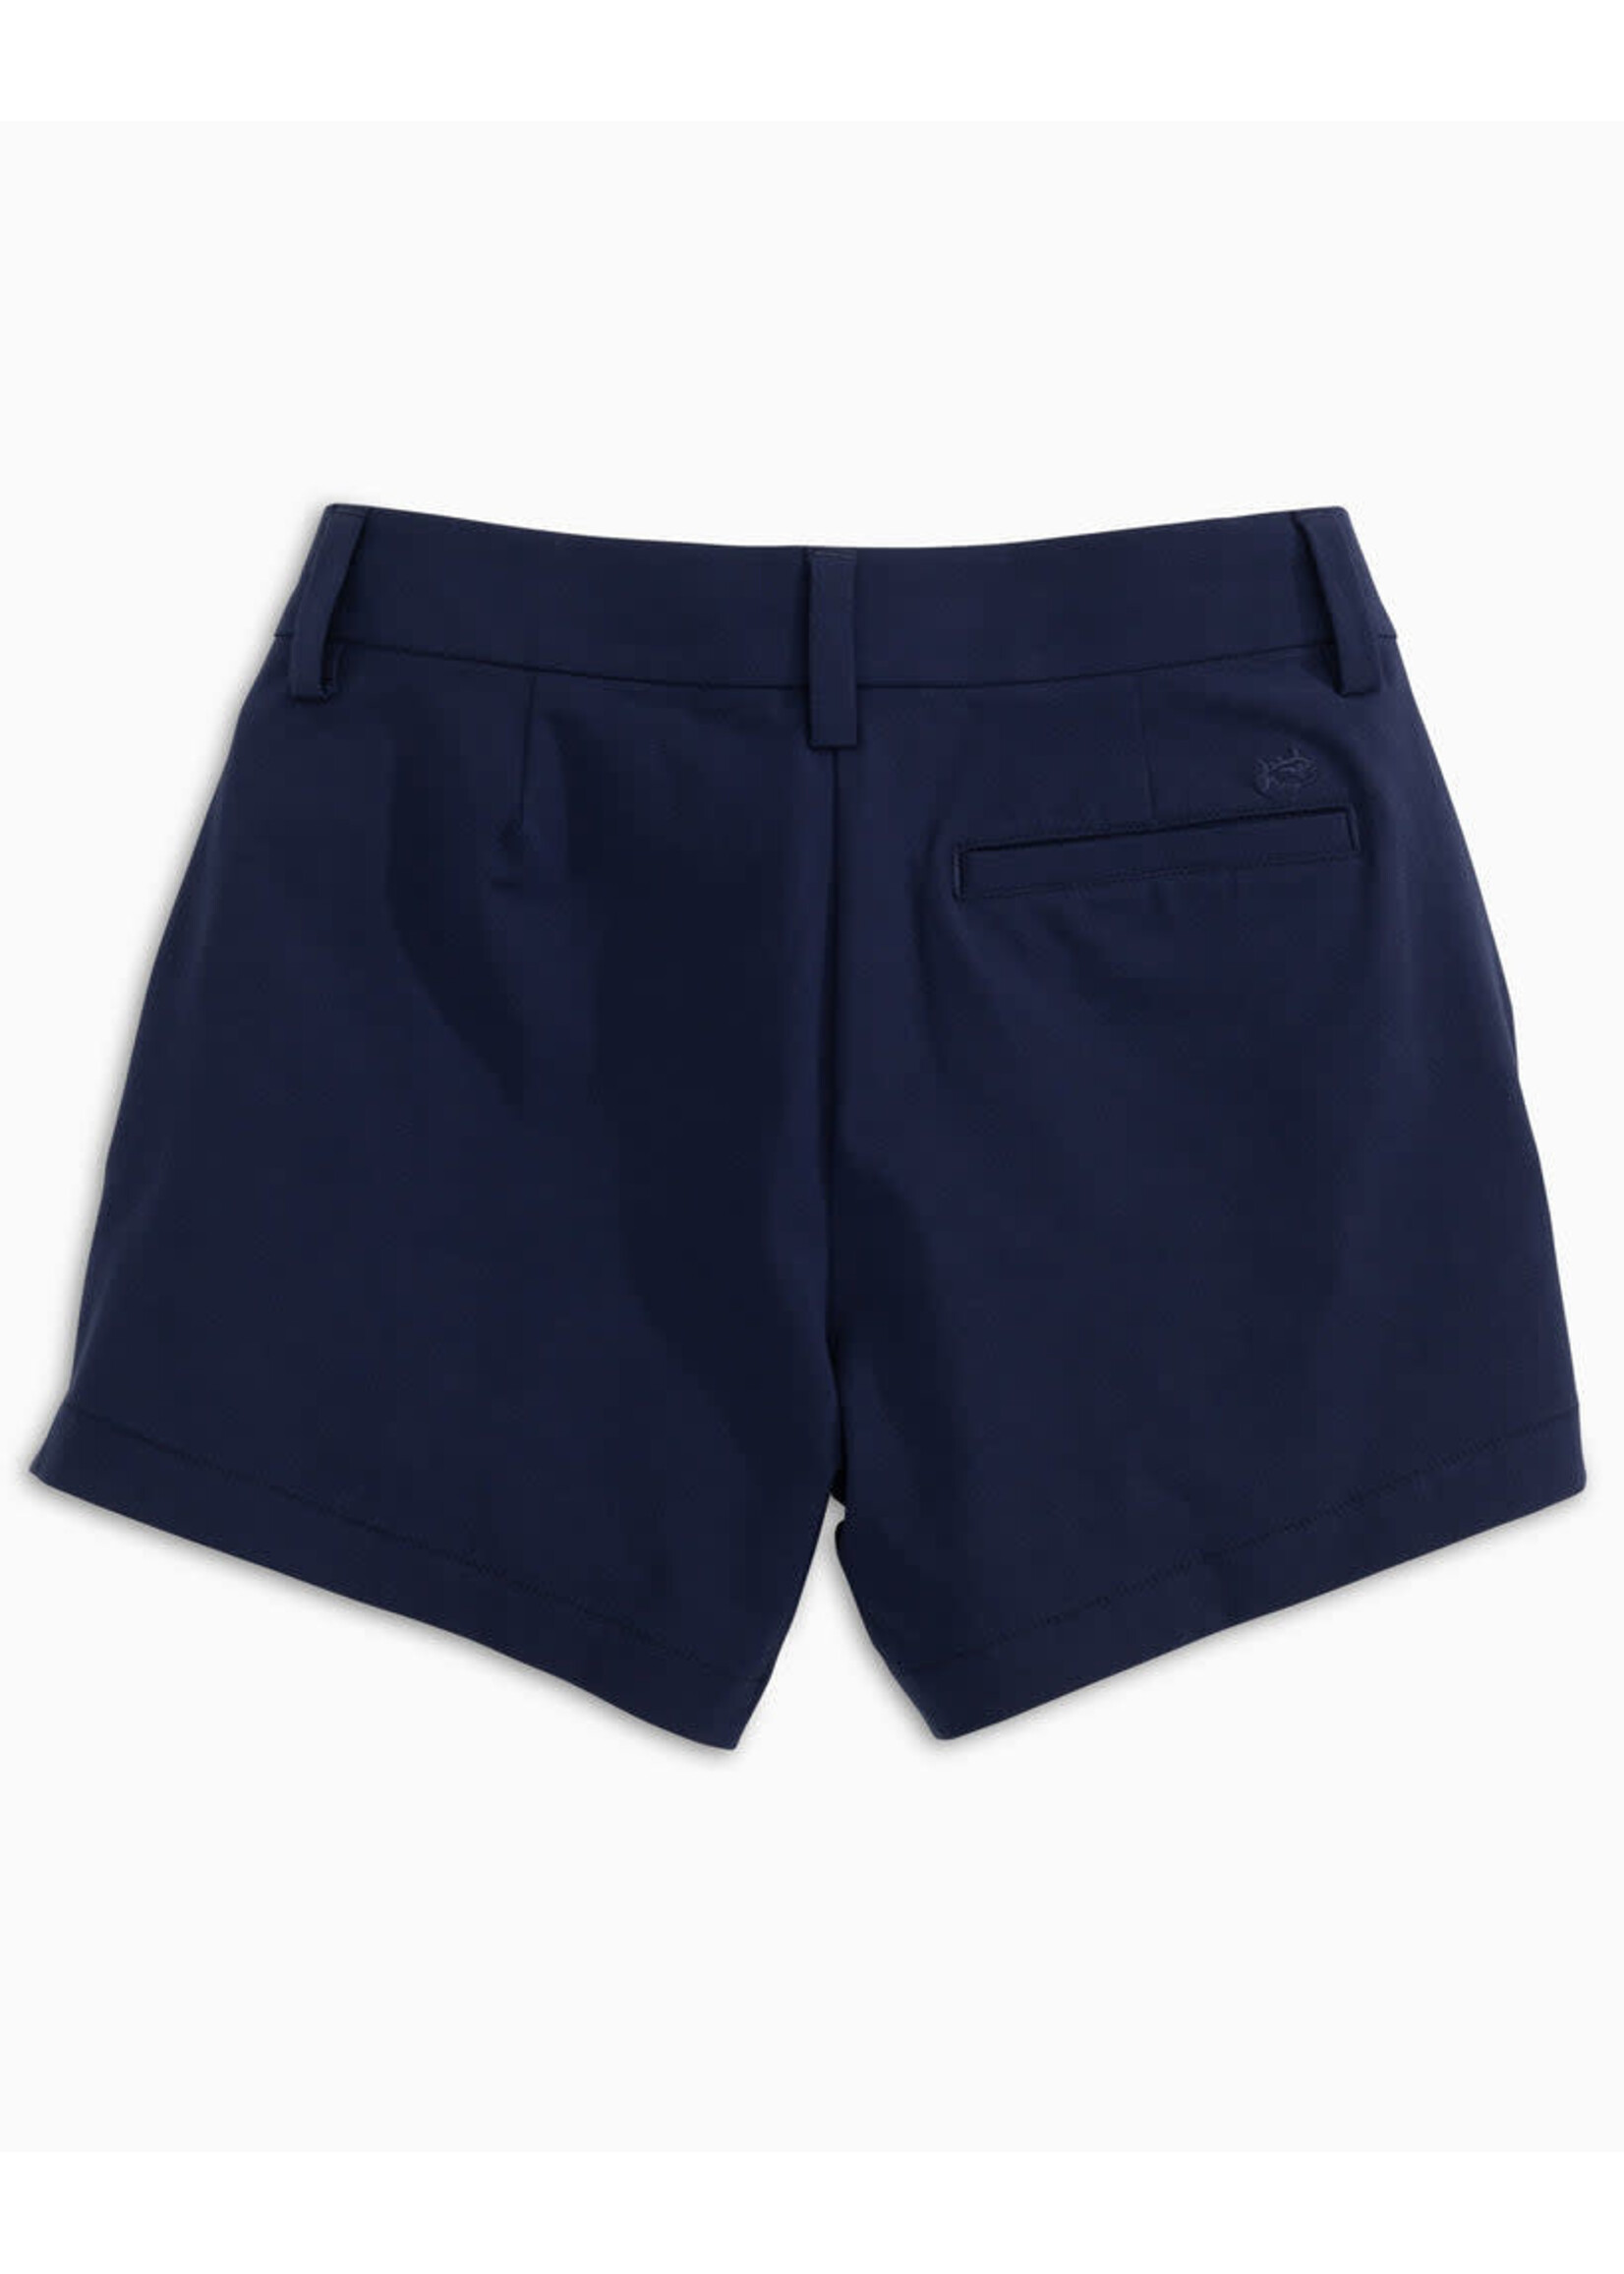 Southern Tide Inlet 4 inch performance short